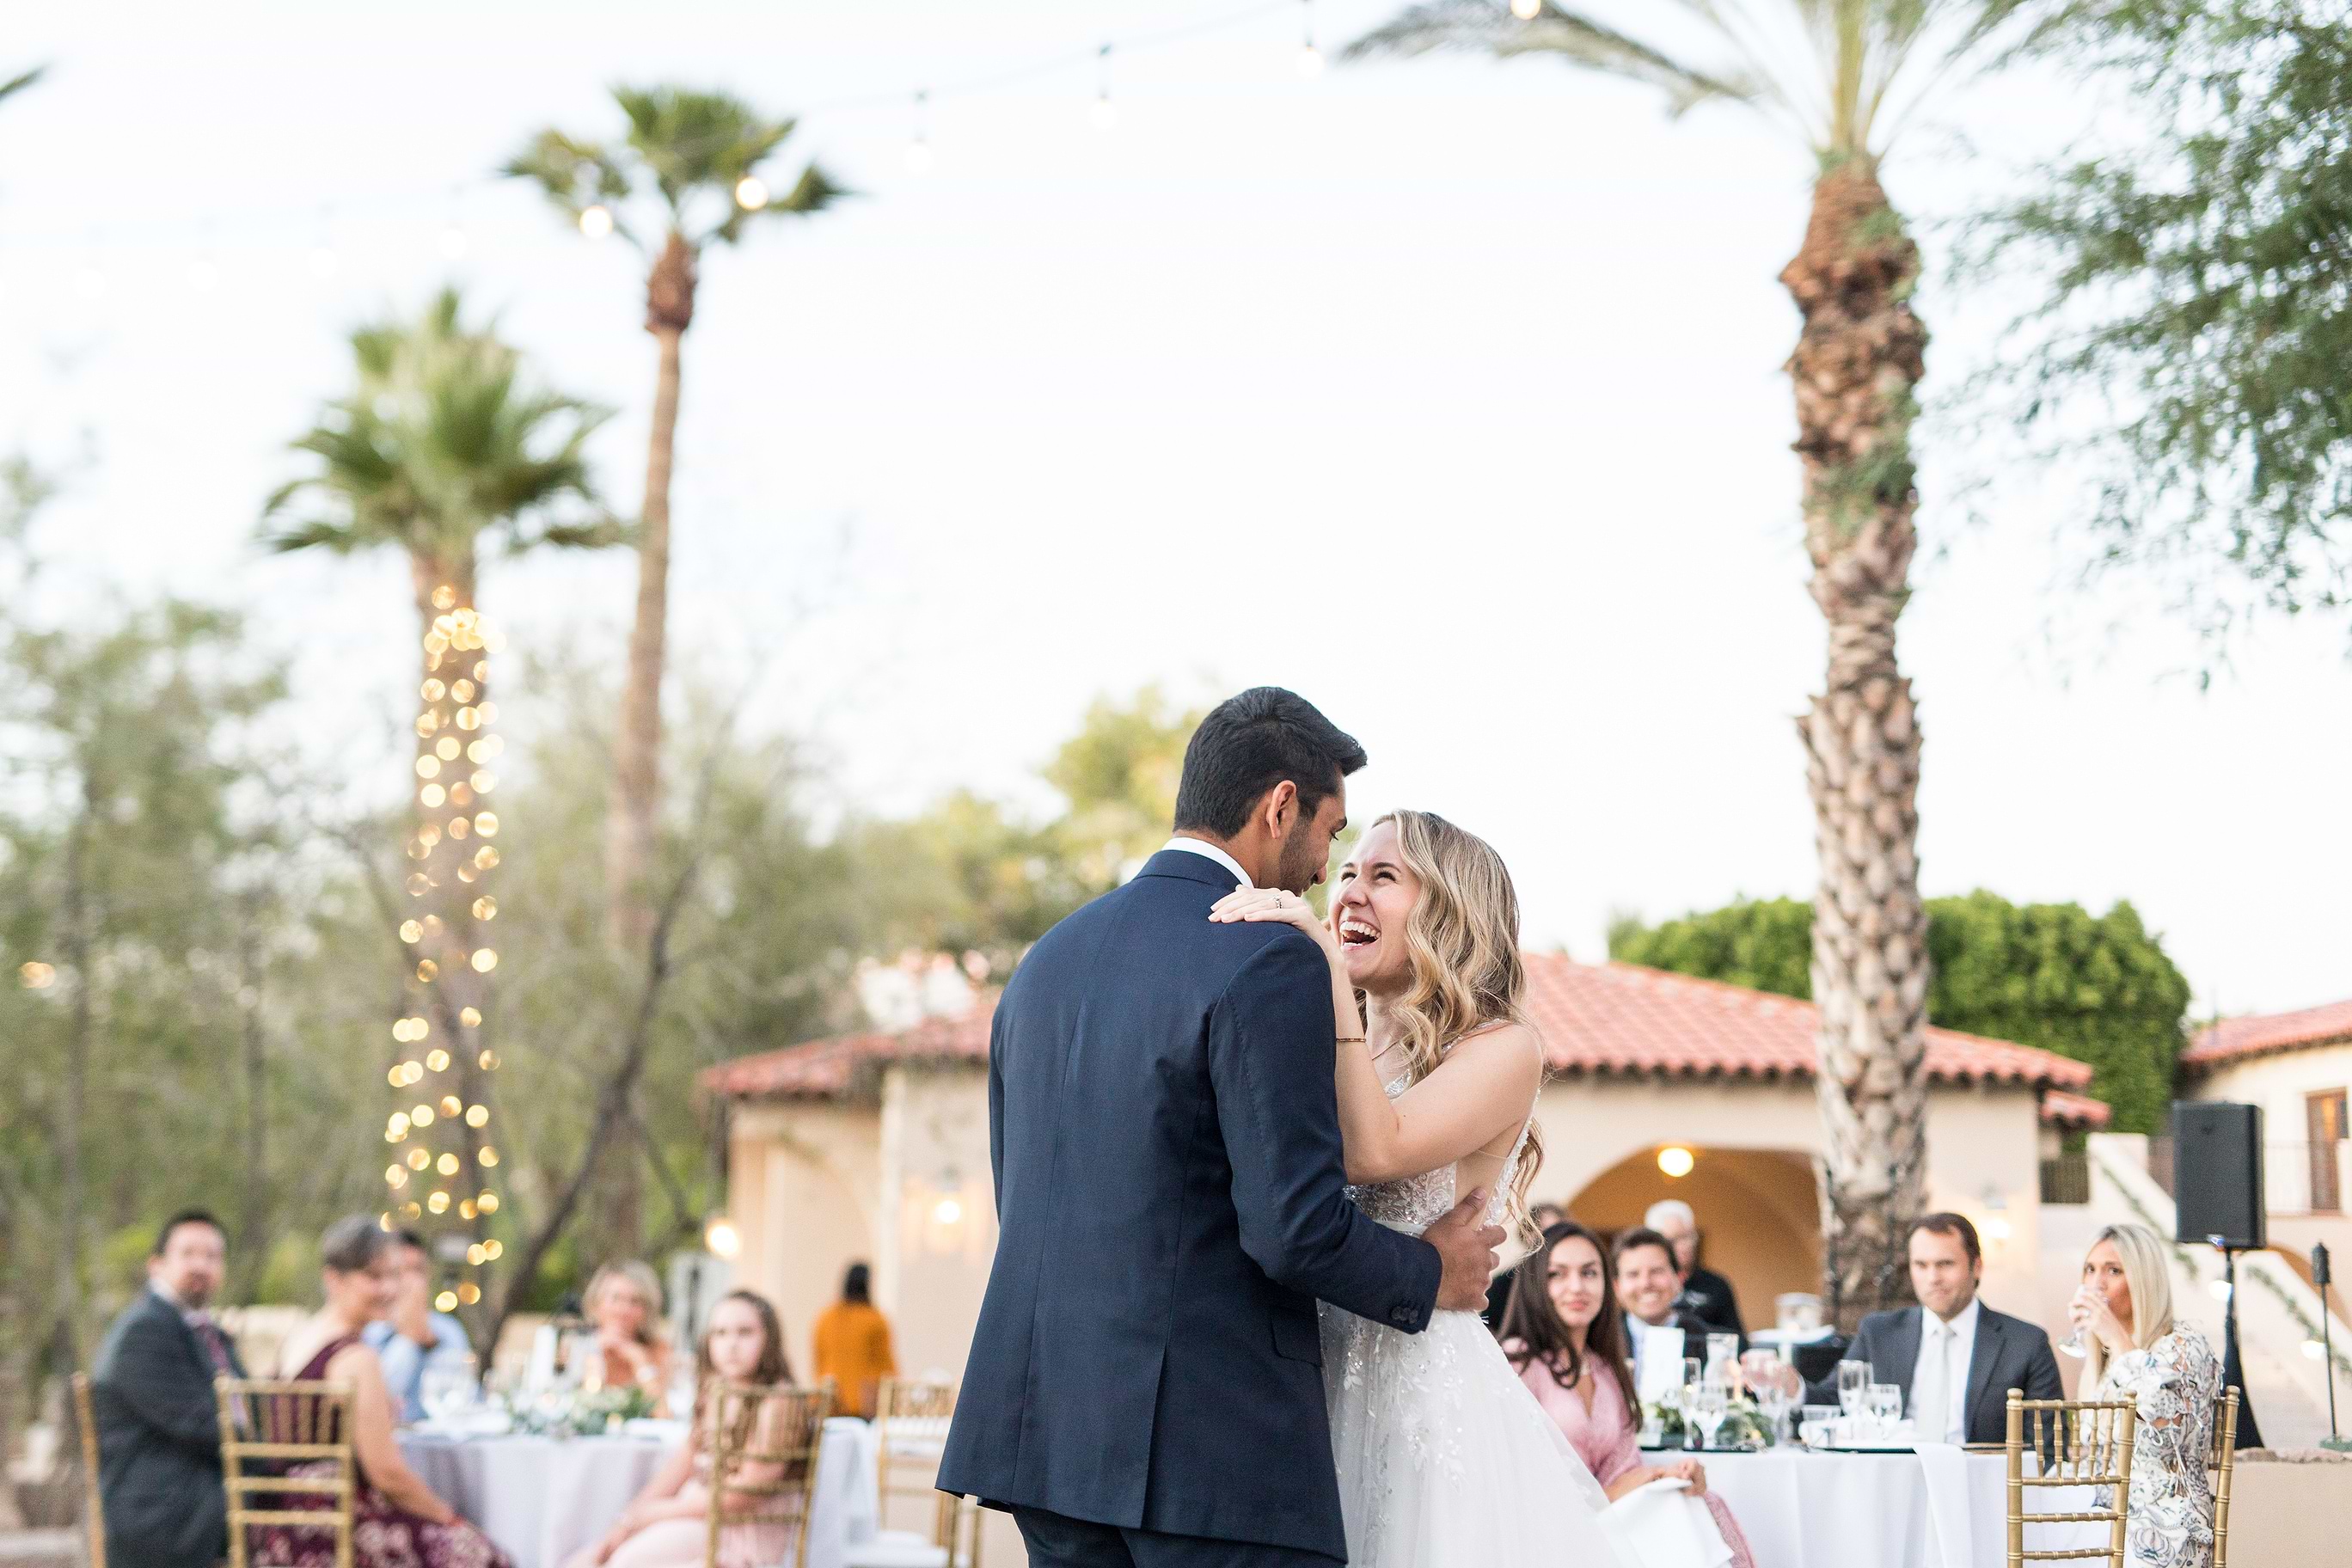 From Vows to Vibes: Wedding Music Ideas for Every Moment